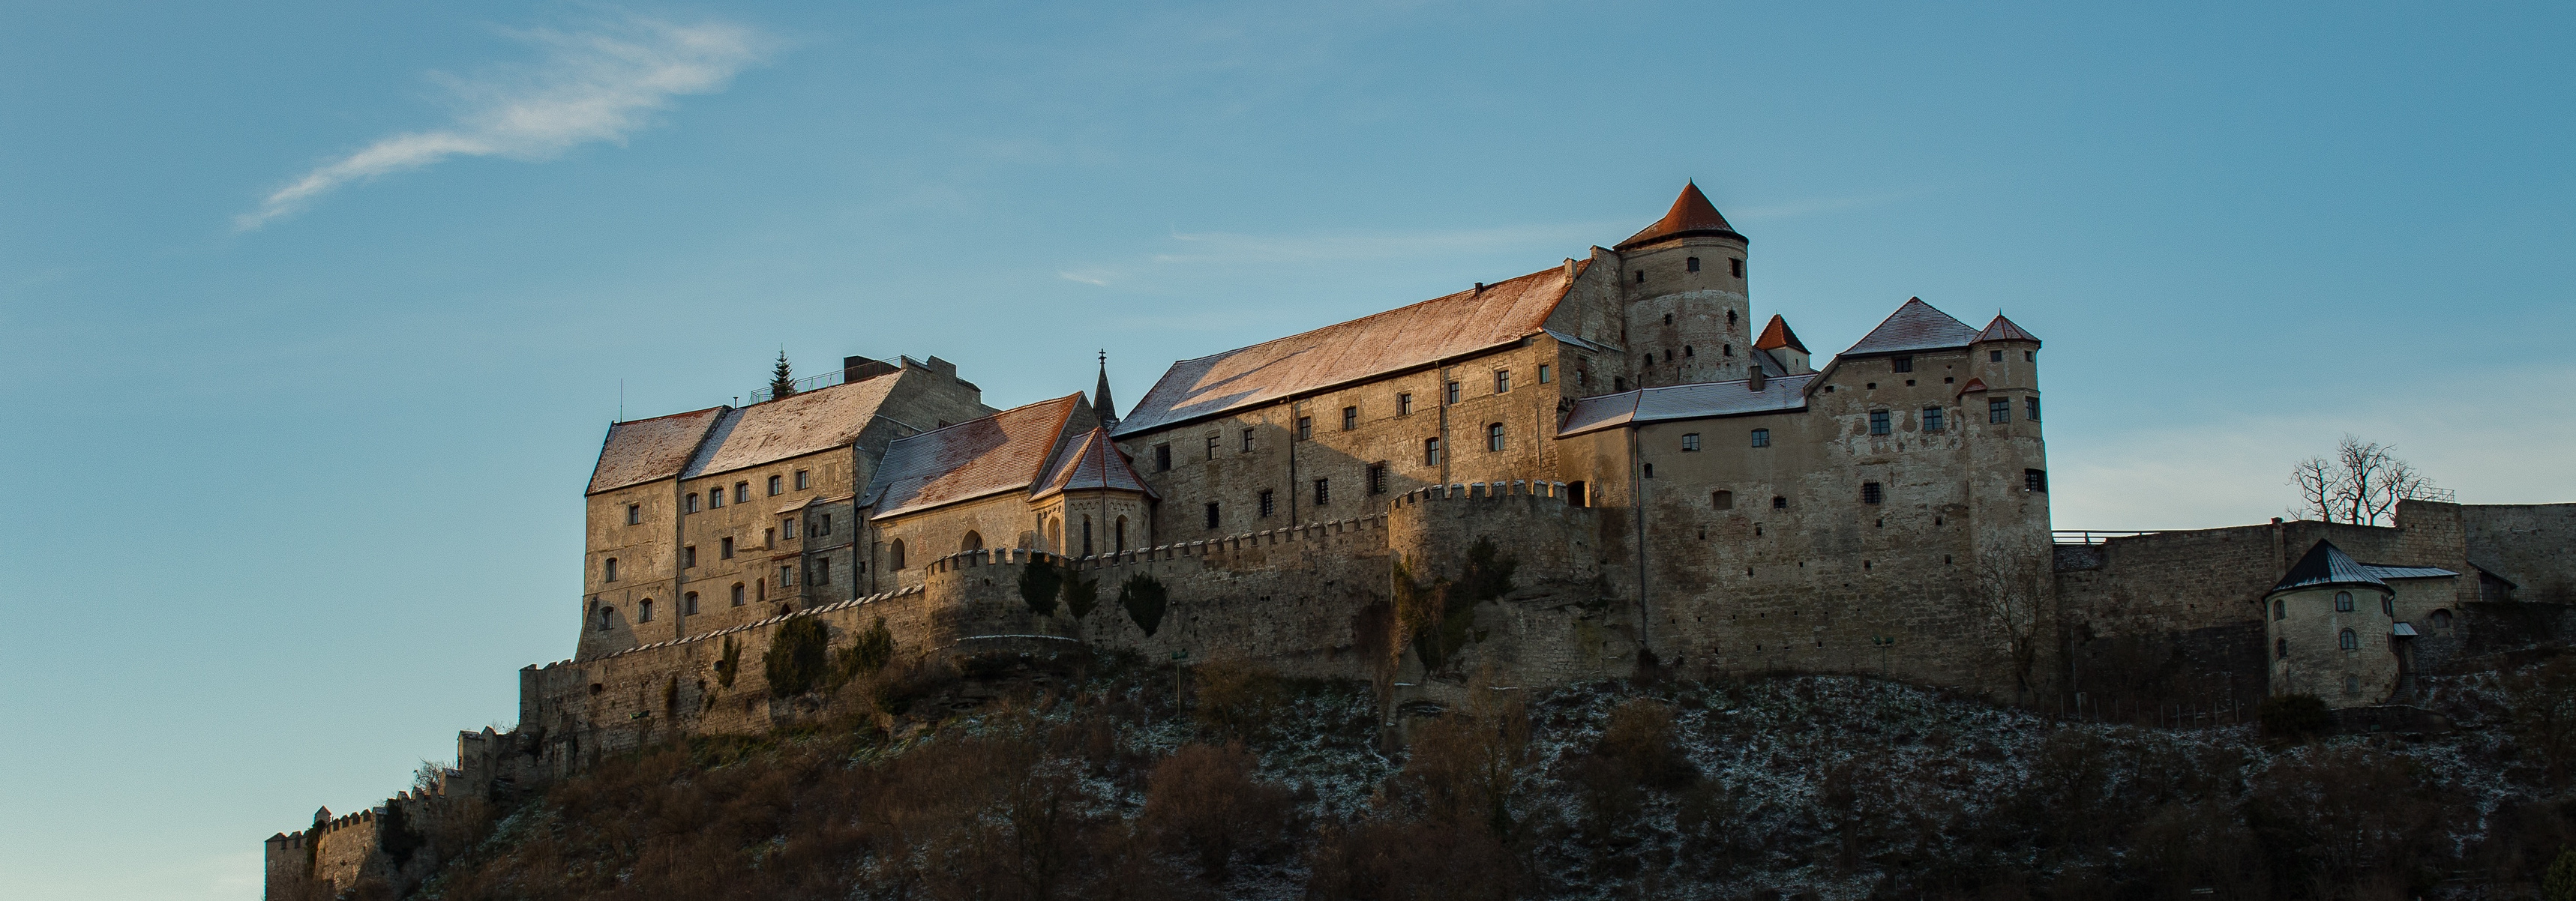 Middle Ages Castle In The Hill